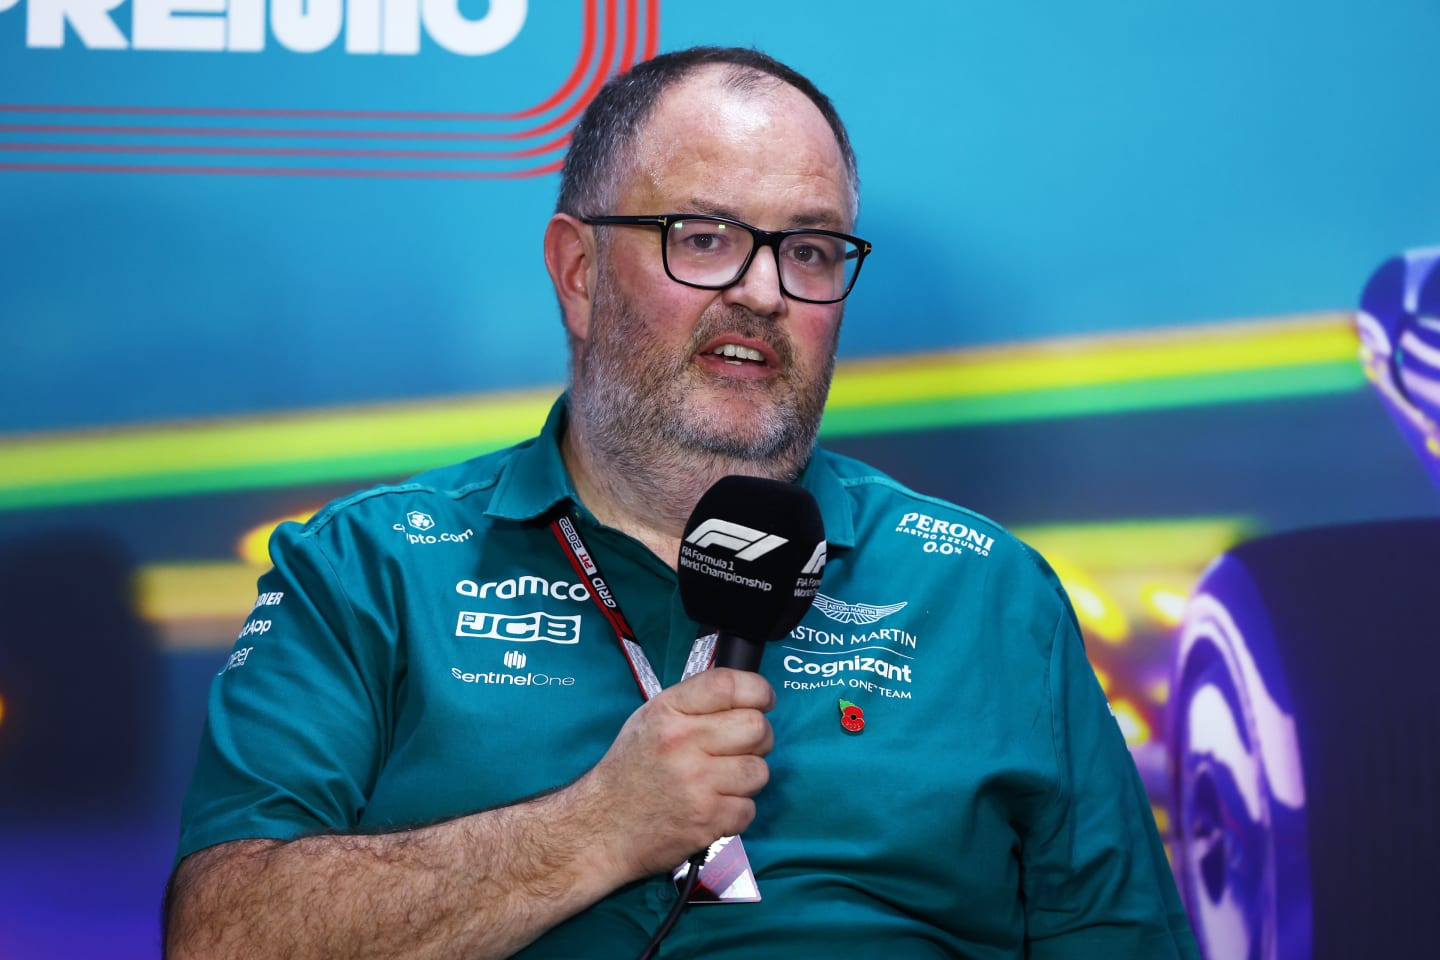 SAO PAULO, BRAZIL - NOVEMBER 12: Tom McCullough, Performance Director at Aston Martin F1 attends a press conference prior to practice ahead of the F1 Grand Prix of Brazil at Autodromo Jose Carlos Pace on November 12, 2022 in Sao Paulo, Brazil. (Photo by Bryn Lennon/Getty Images)